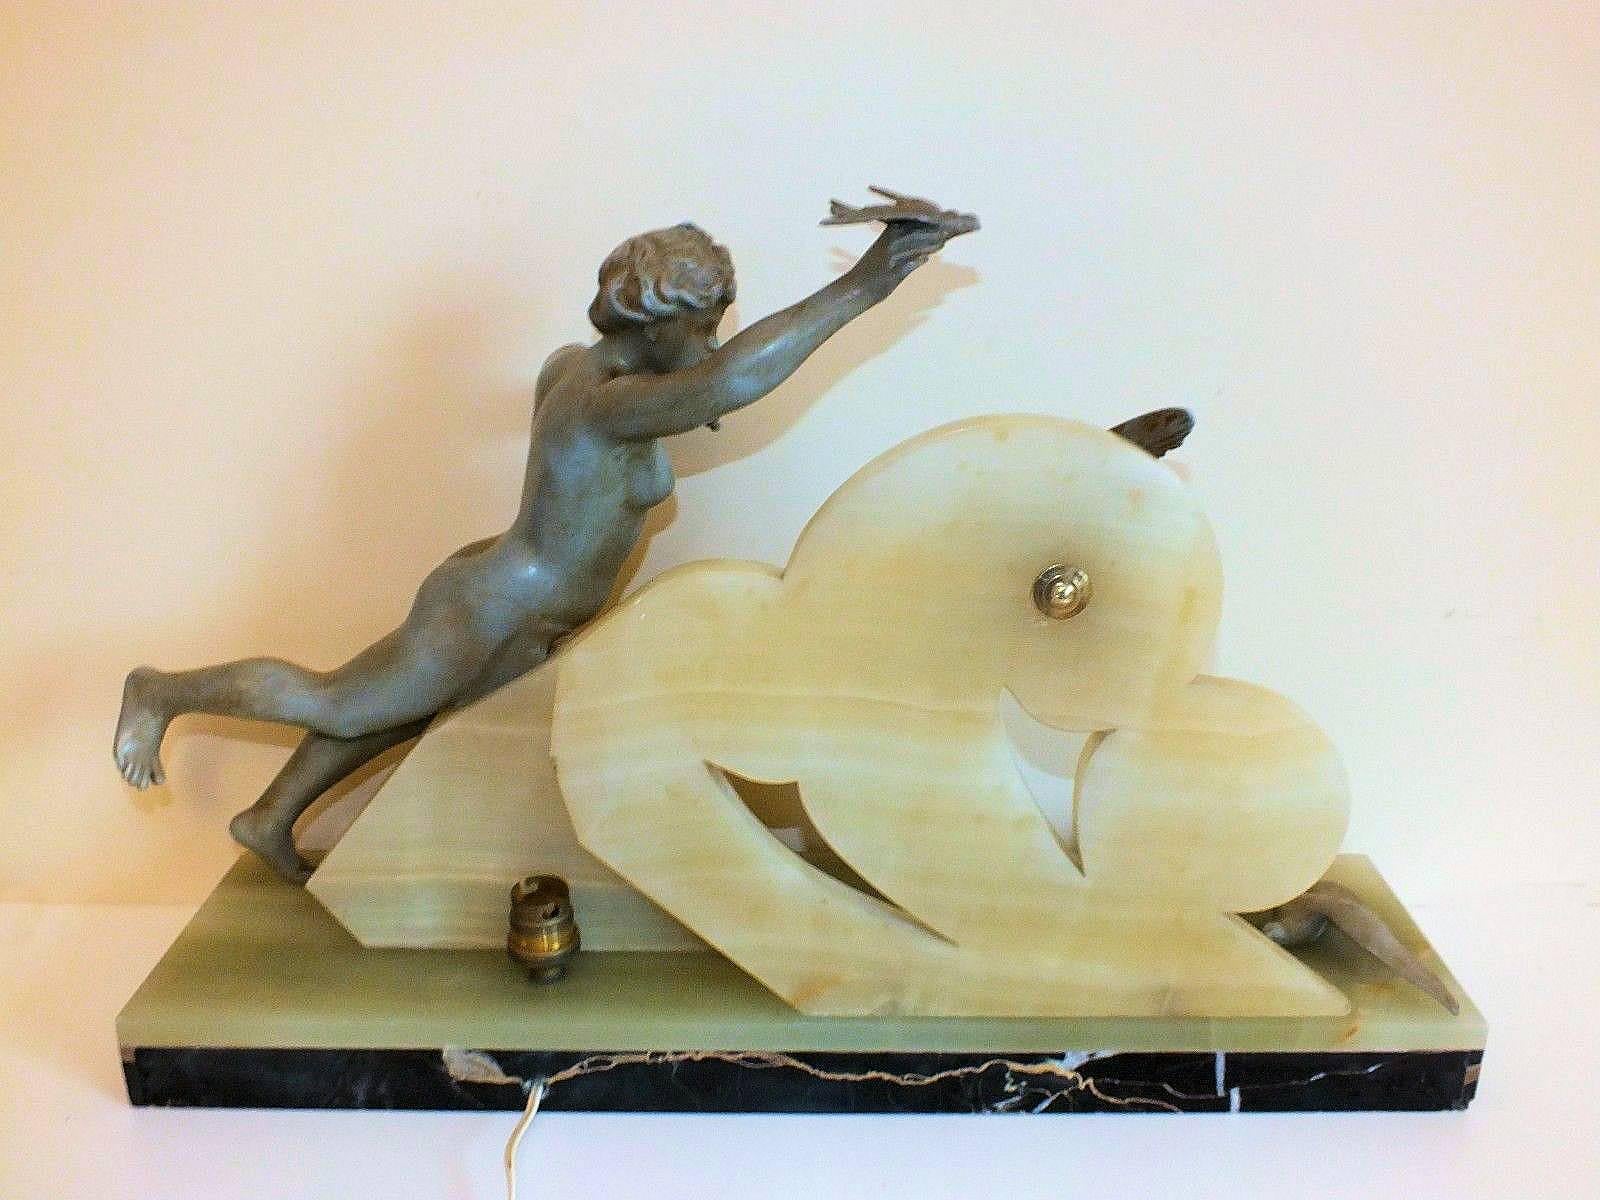 Onyx Very Large and Impressive 1930s Art Deco Figurative French Lamp